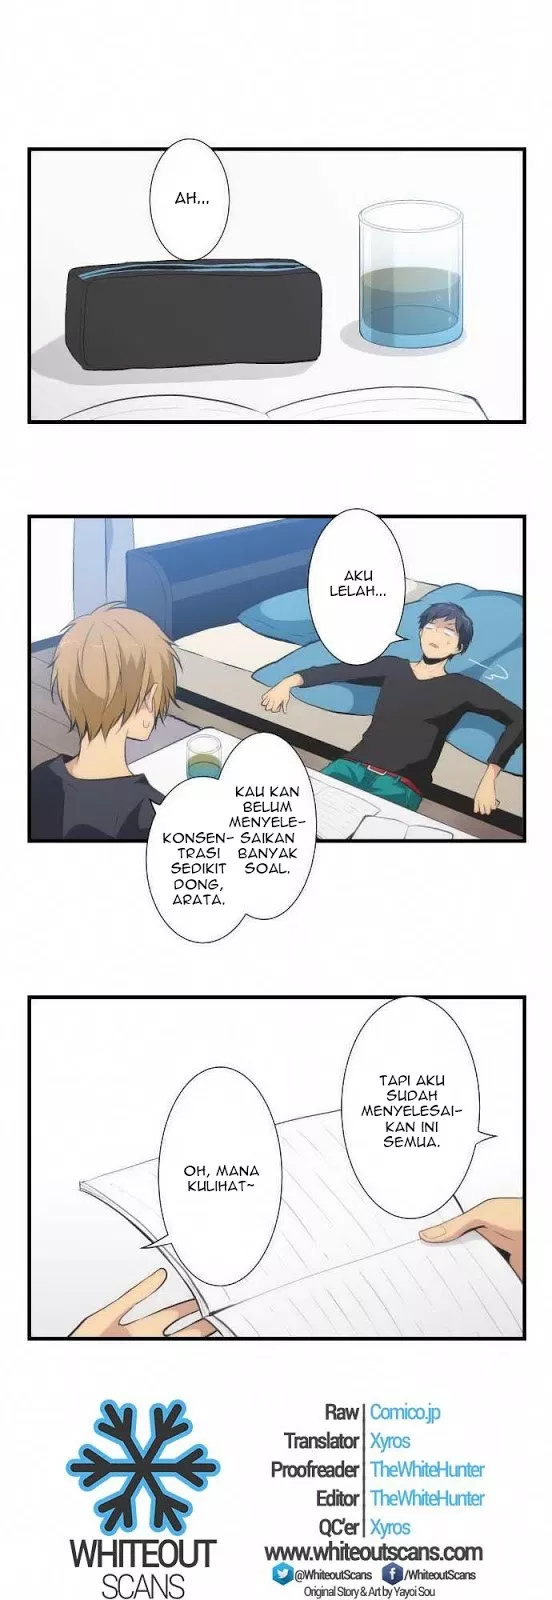 ReLIFE Chapter 47